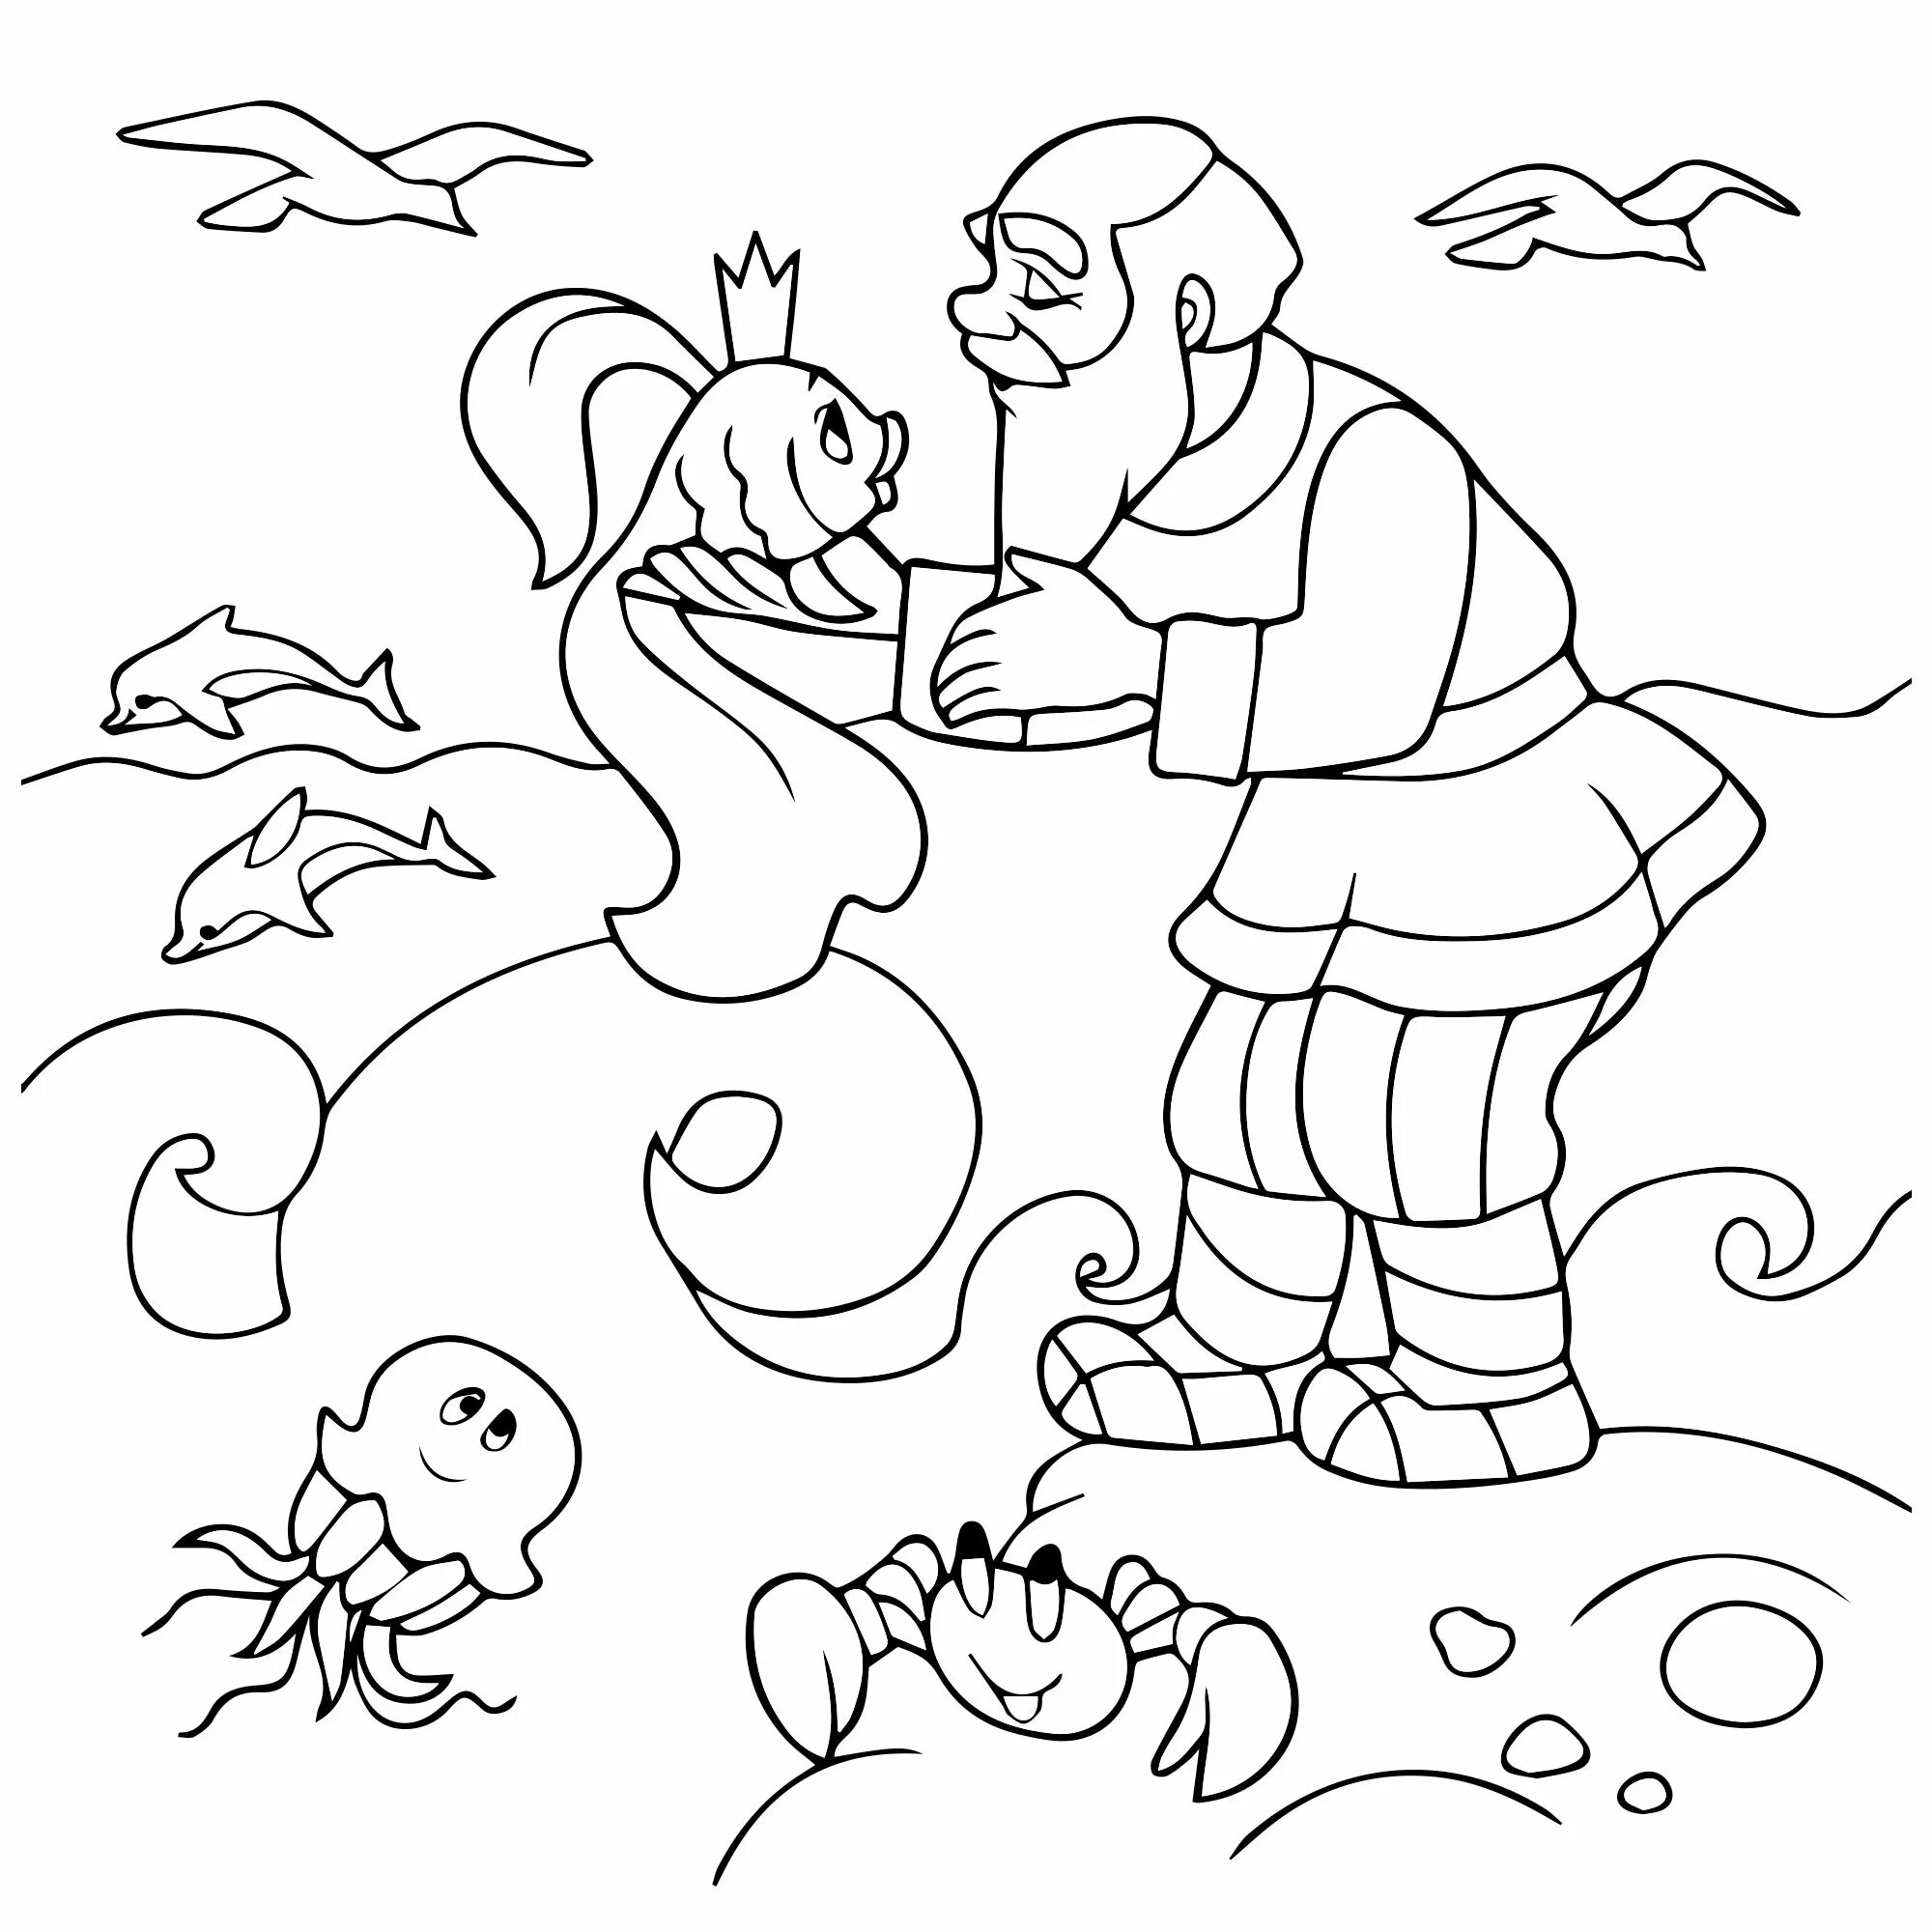 Amazing fish and fish coloring books for kids